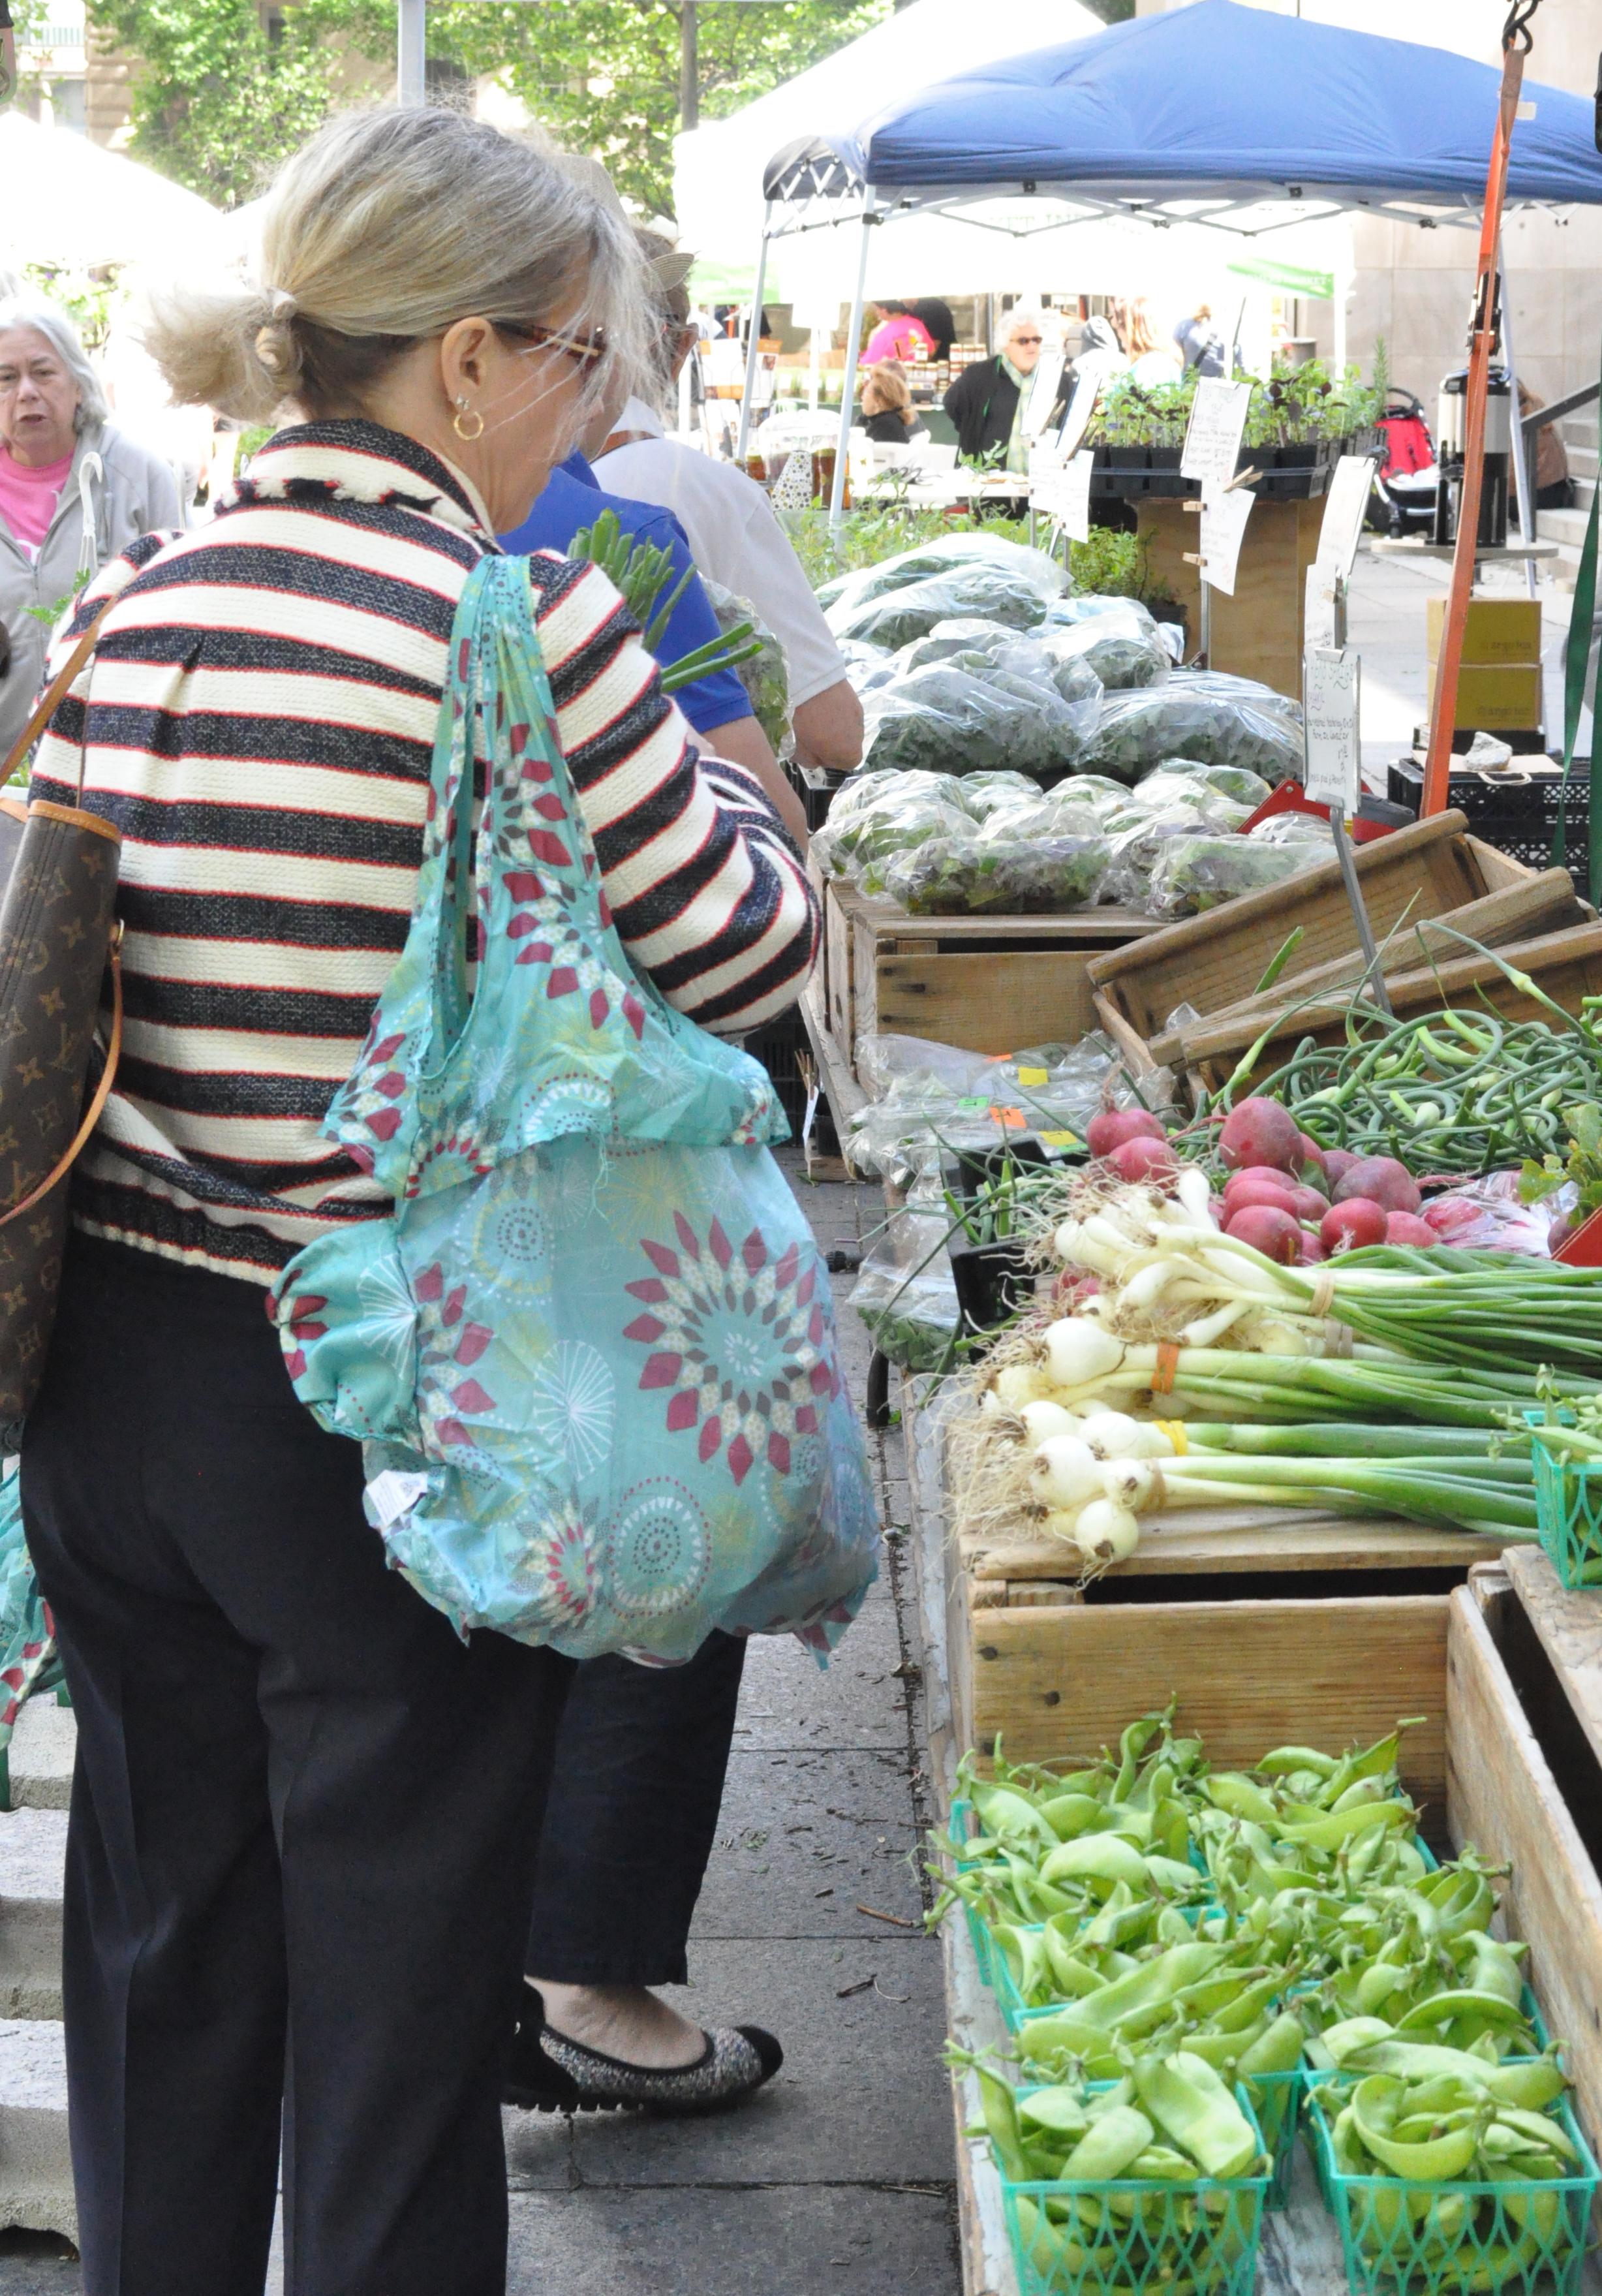 A middle aged white woman holding a blue printed tote bag walks through a Farmers' Market looking at radishes, green onions, and snap peas.